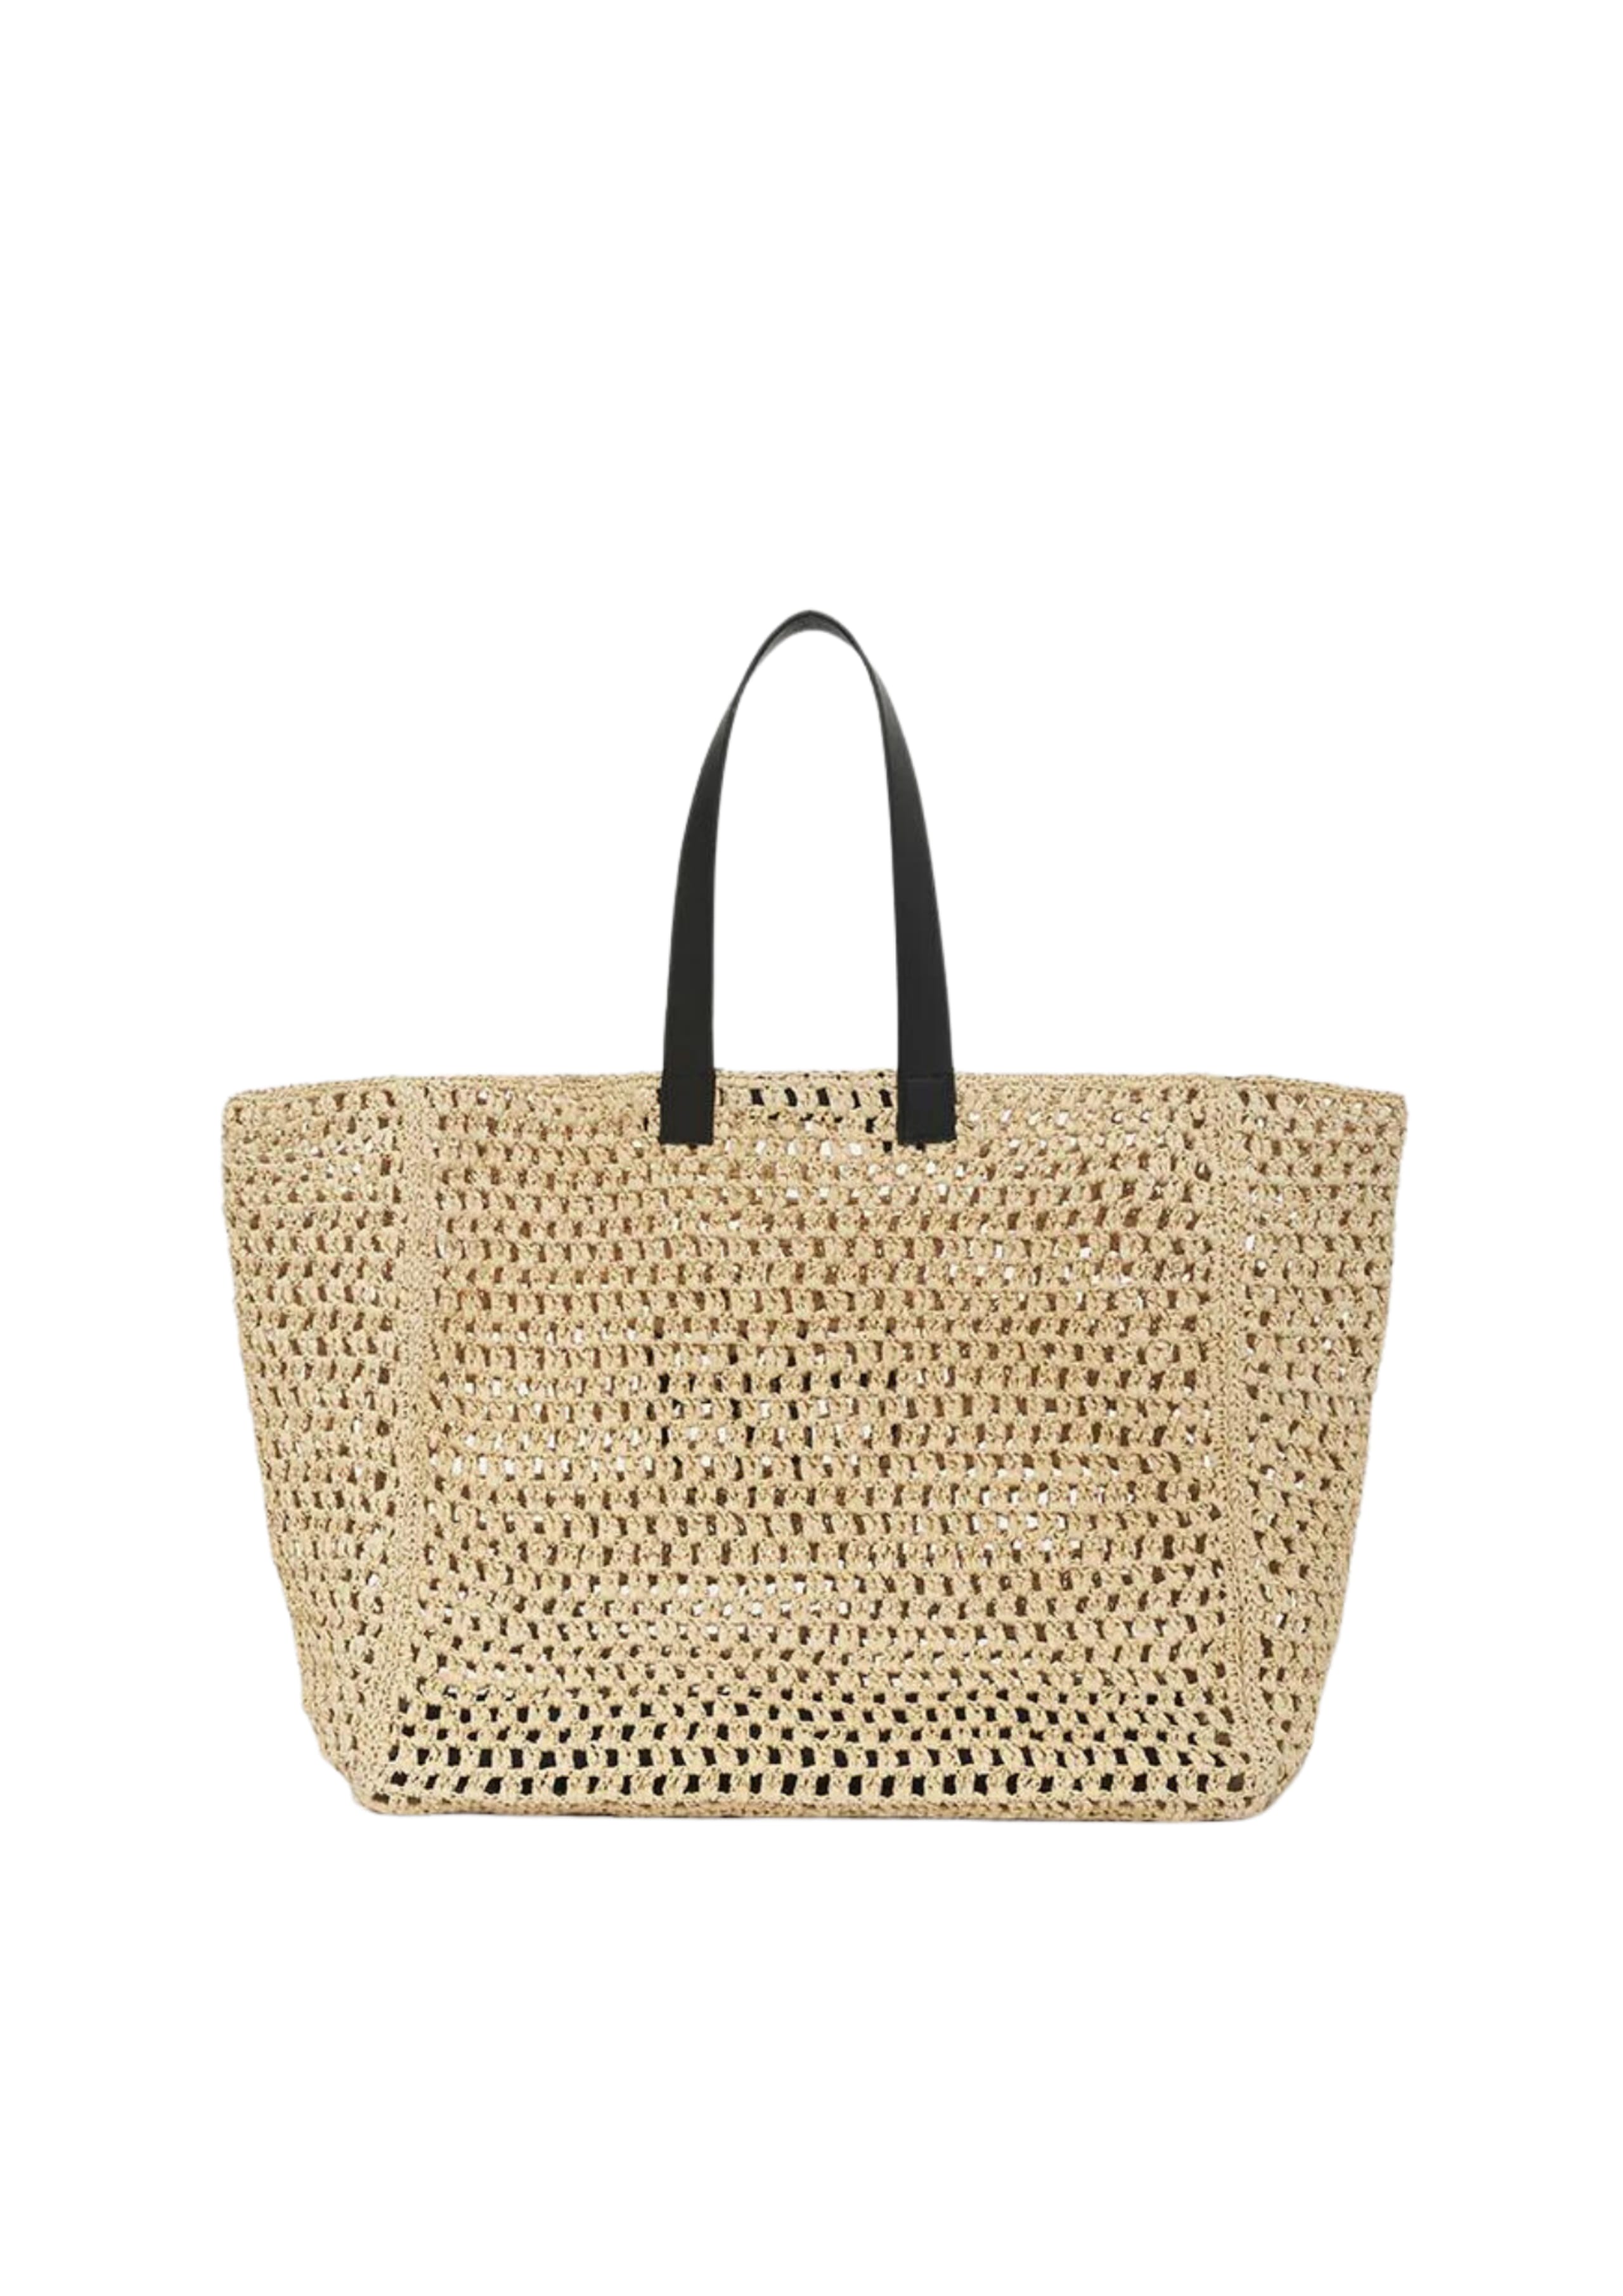 Anine Bing - Tasche - Large Rio Tote - Natural